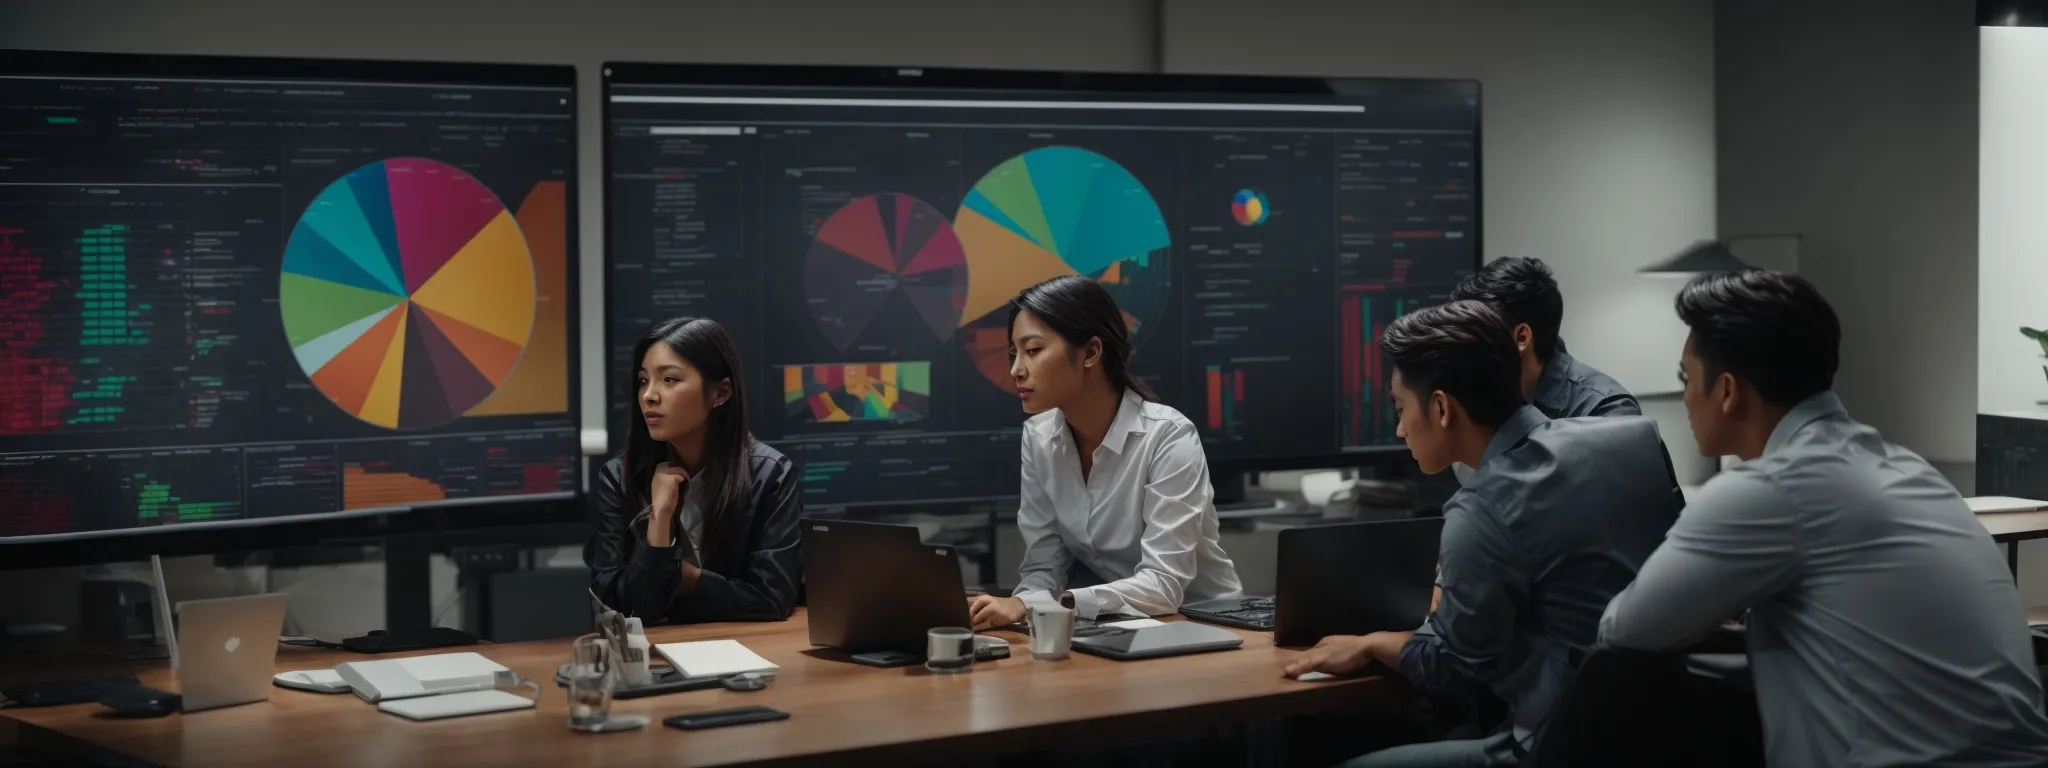 a dynamic marketing team strategizing around a large computer screen displaying colorful pie charts and data analytics.